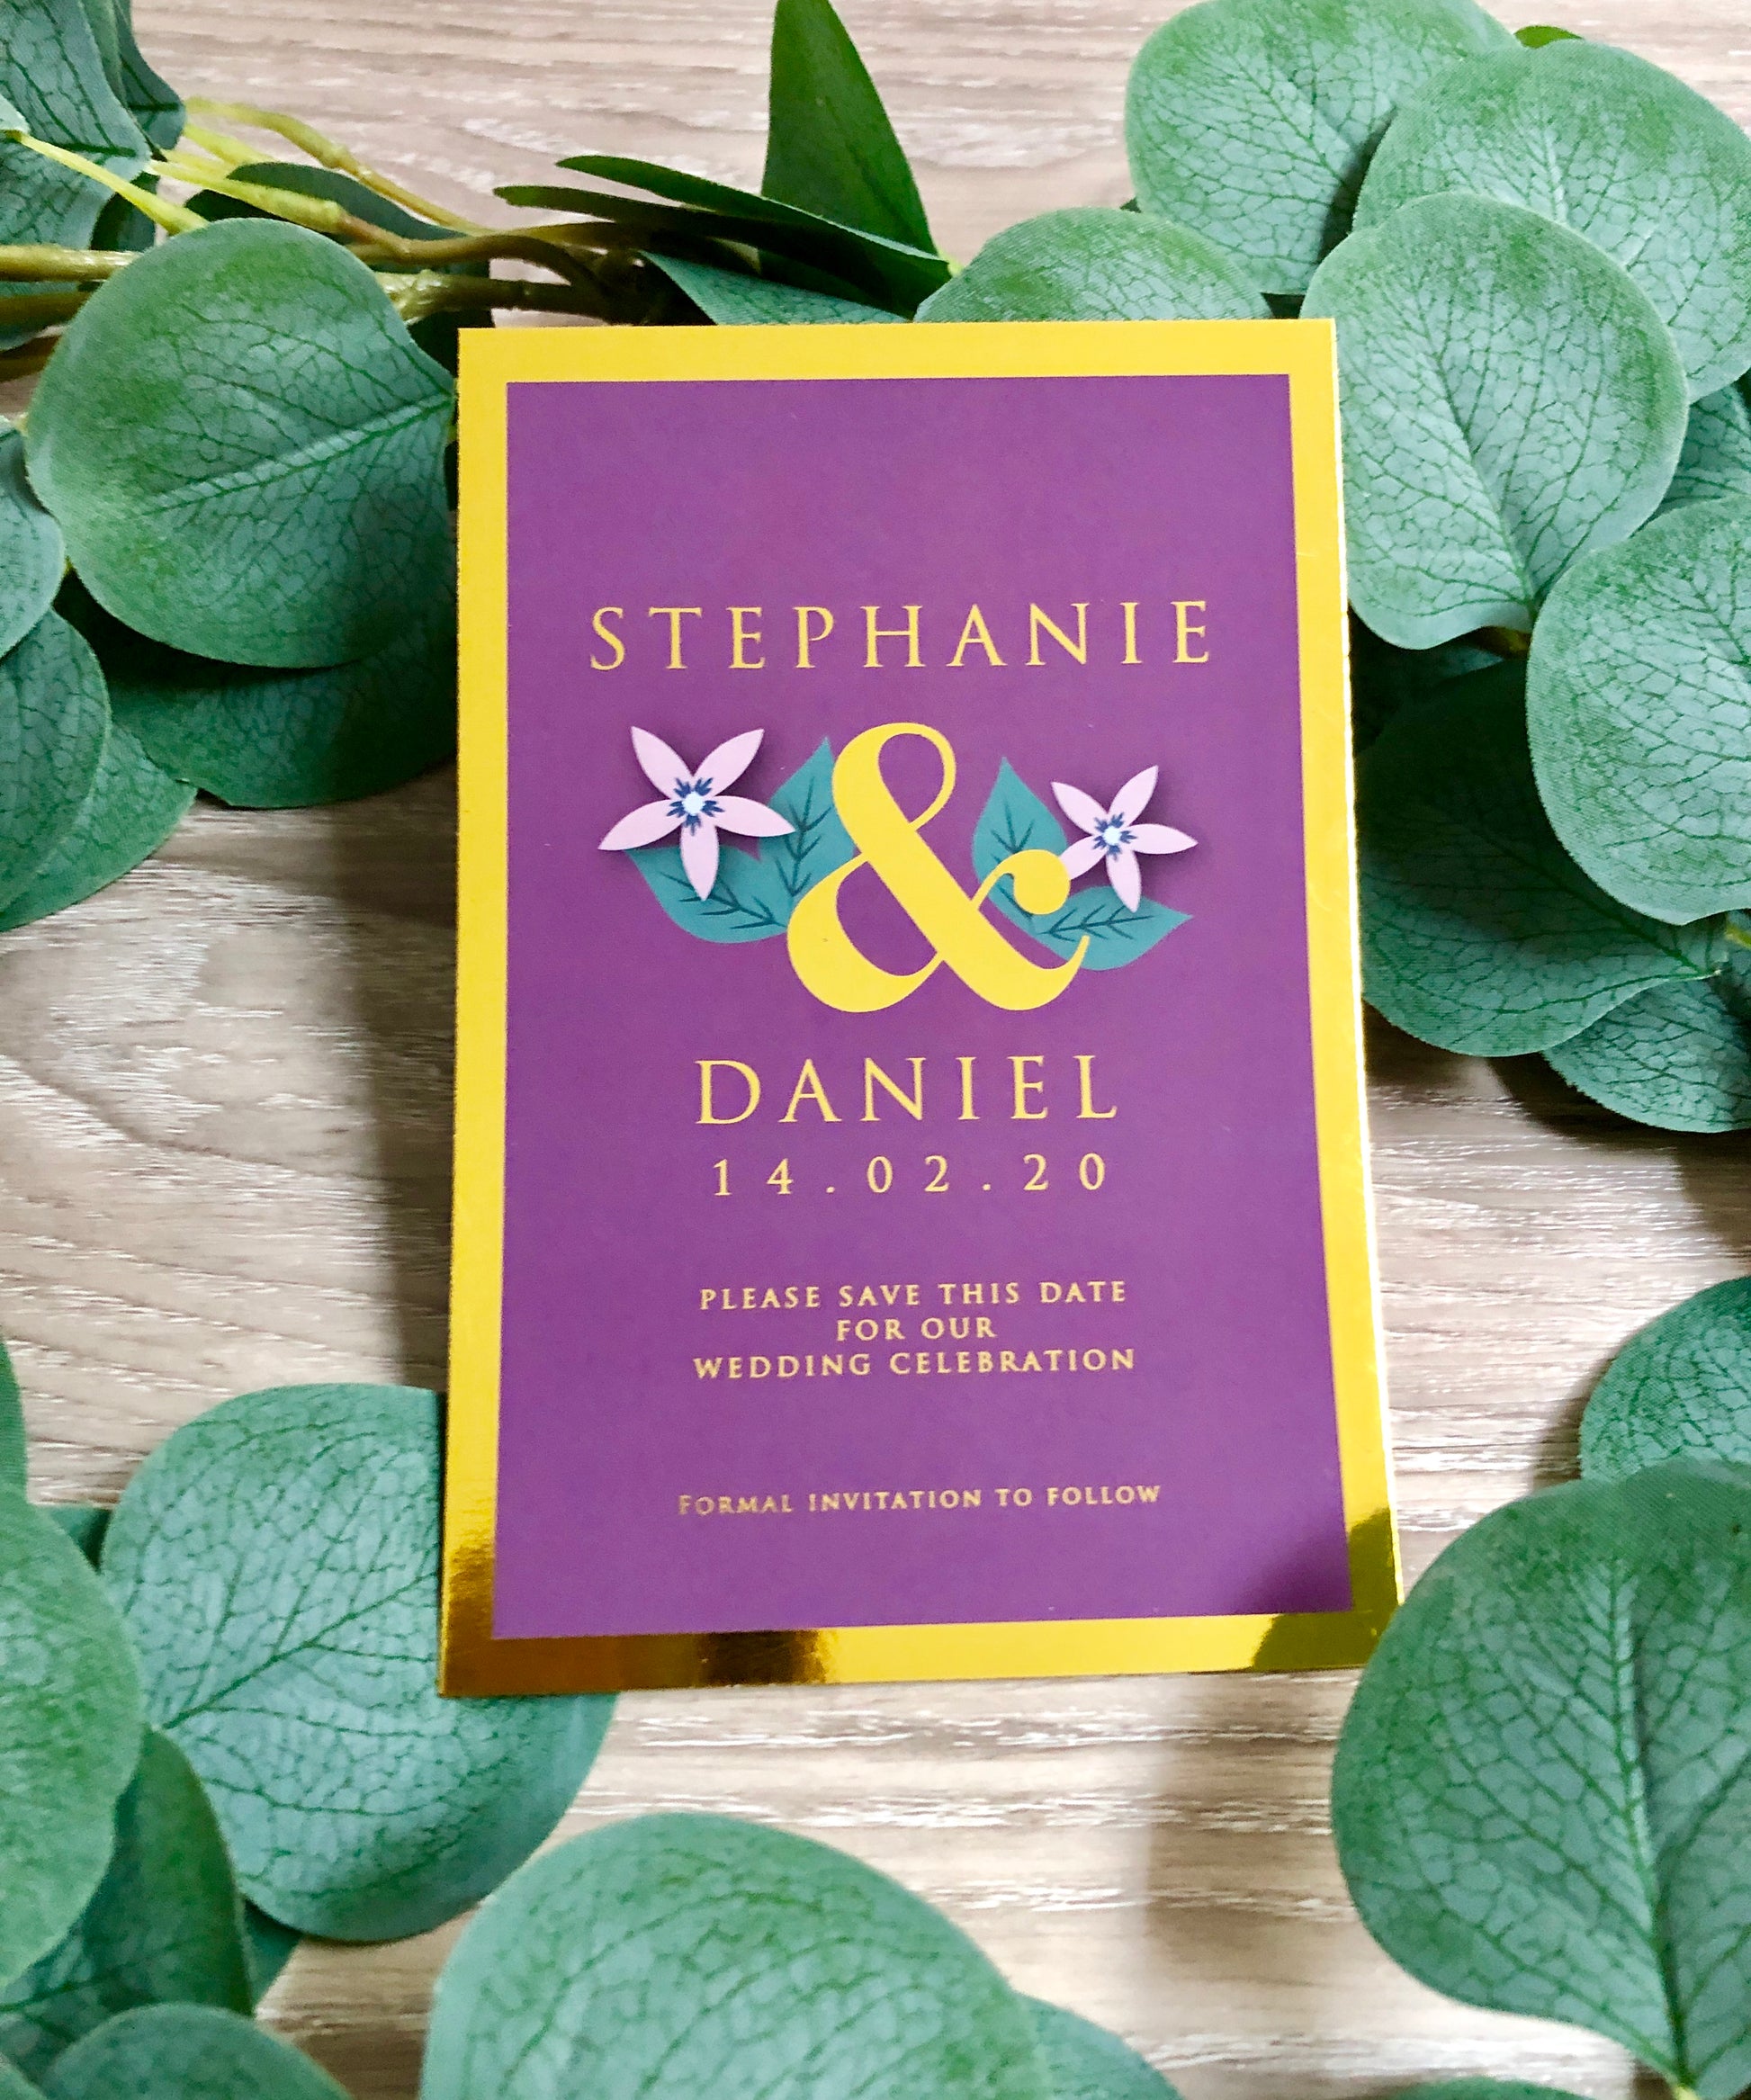 "Stephanie" Gold Foil Save the Date Wedding Invitation in Blush Dusty Pink, Purple or Navy - Glitzy Prints